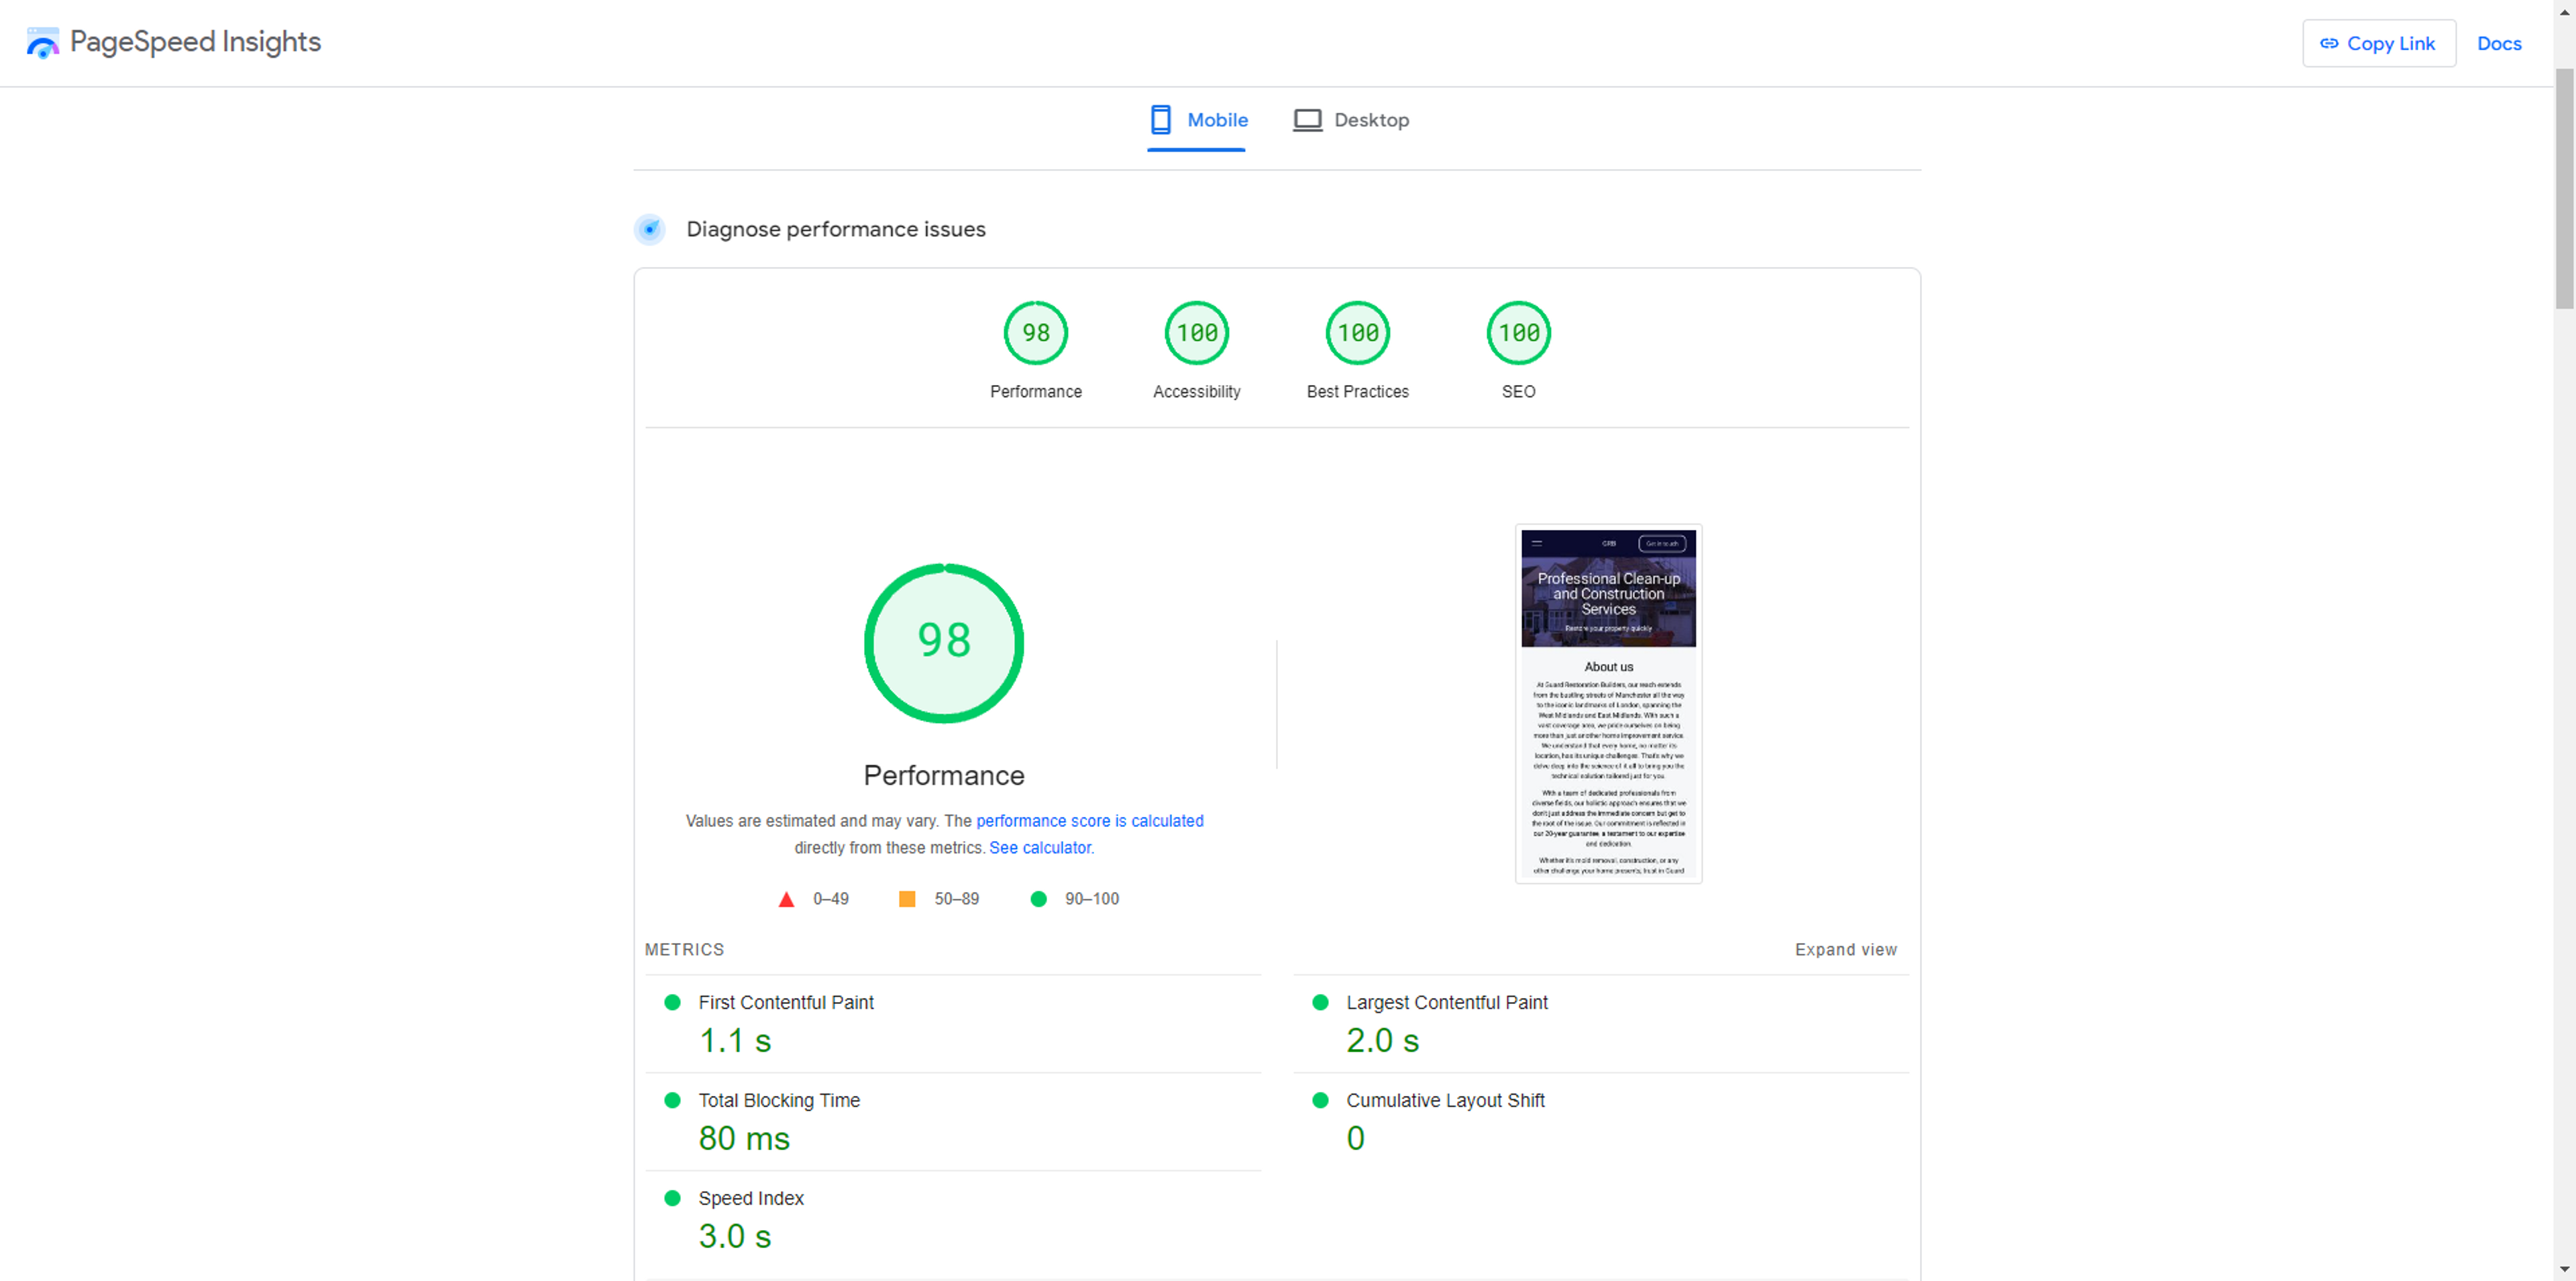 Google PageSpeed mobile results, performance scoring 98 and the rest 100